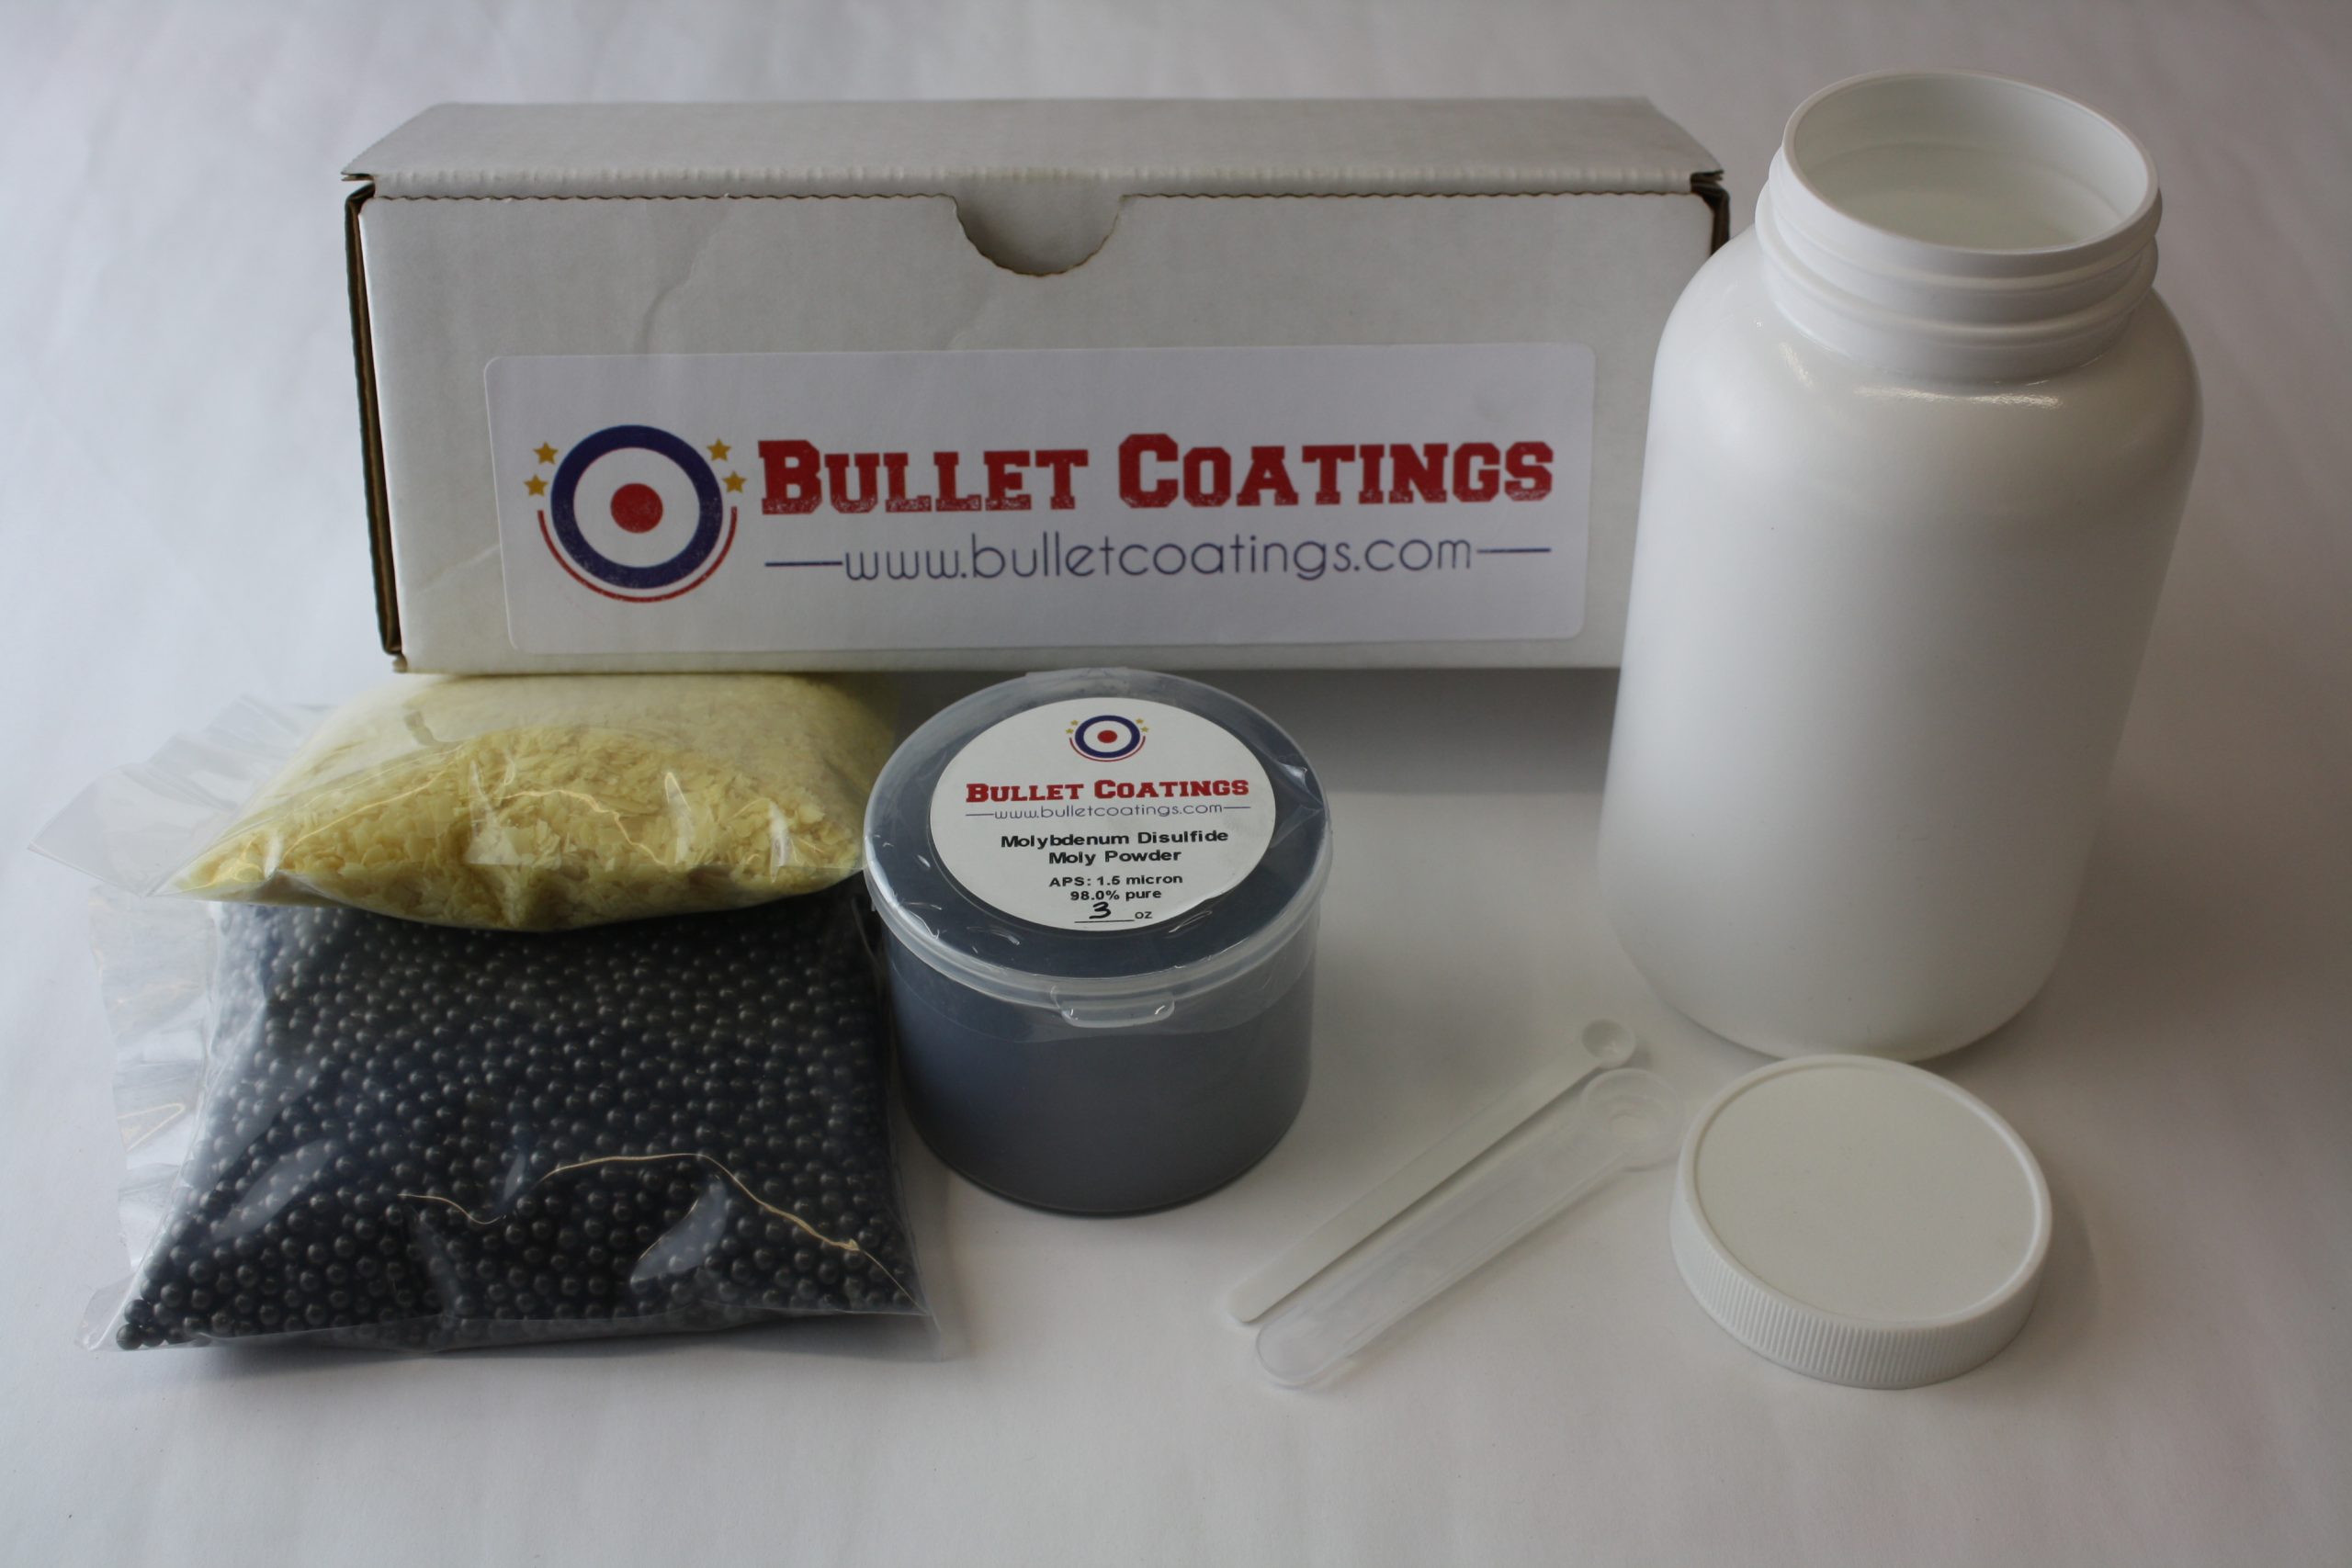 https://www.bulletcoatings.com/wp-content/uploads/2022/09/moly-wax-bullet-coating-scaled-2.jpg